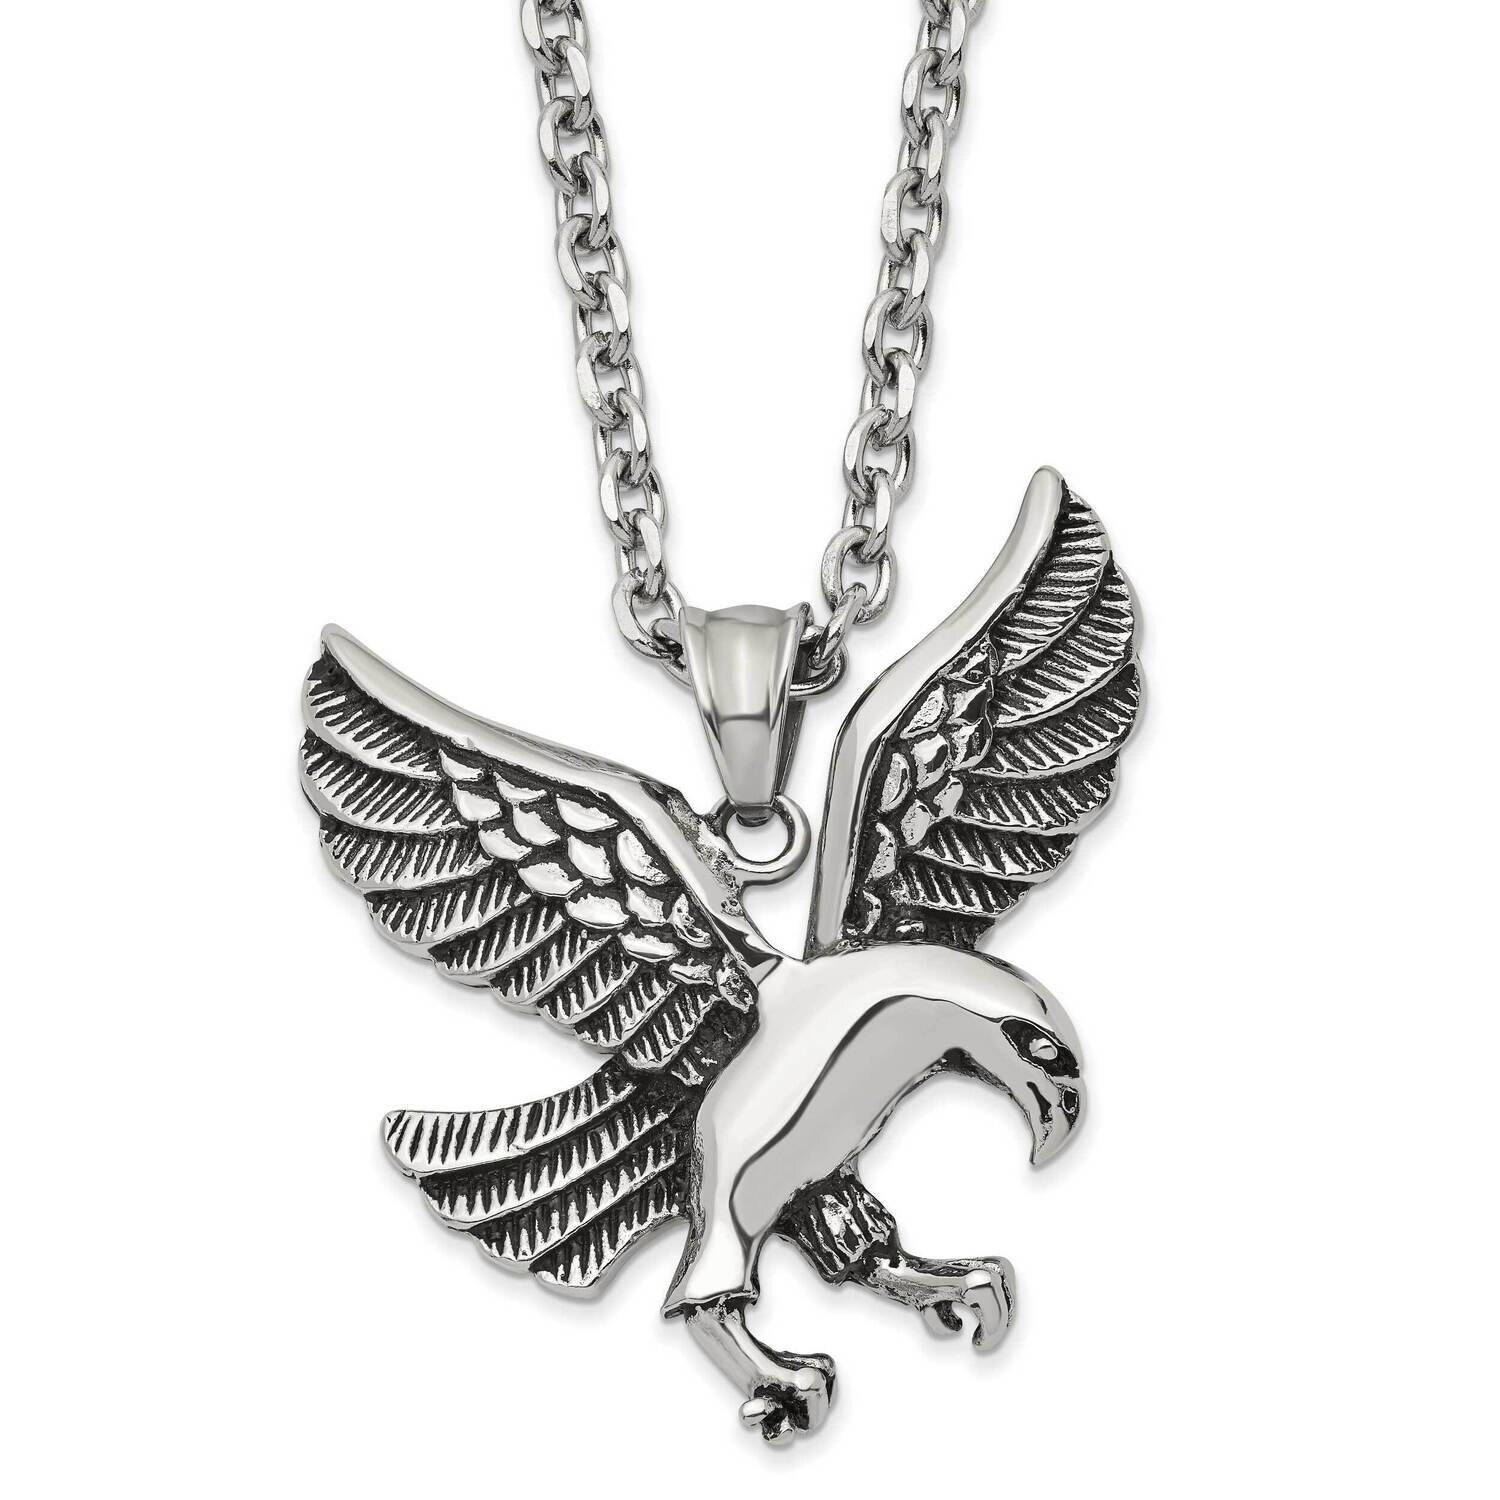 Antiqued and Polished Eagle 24 Inch Necklace Stainless Steel SRN2860-24